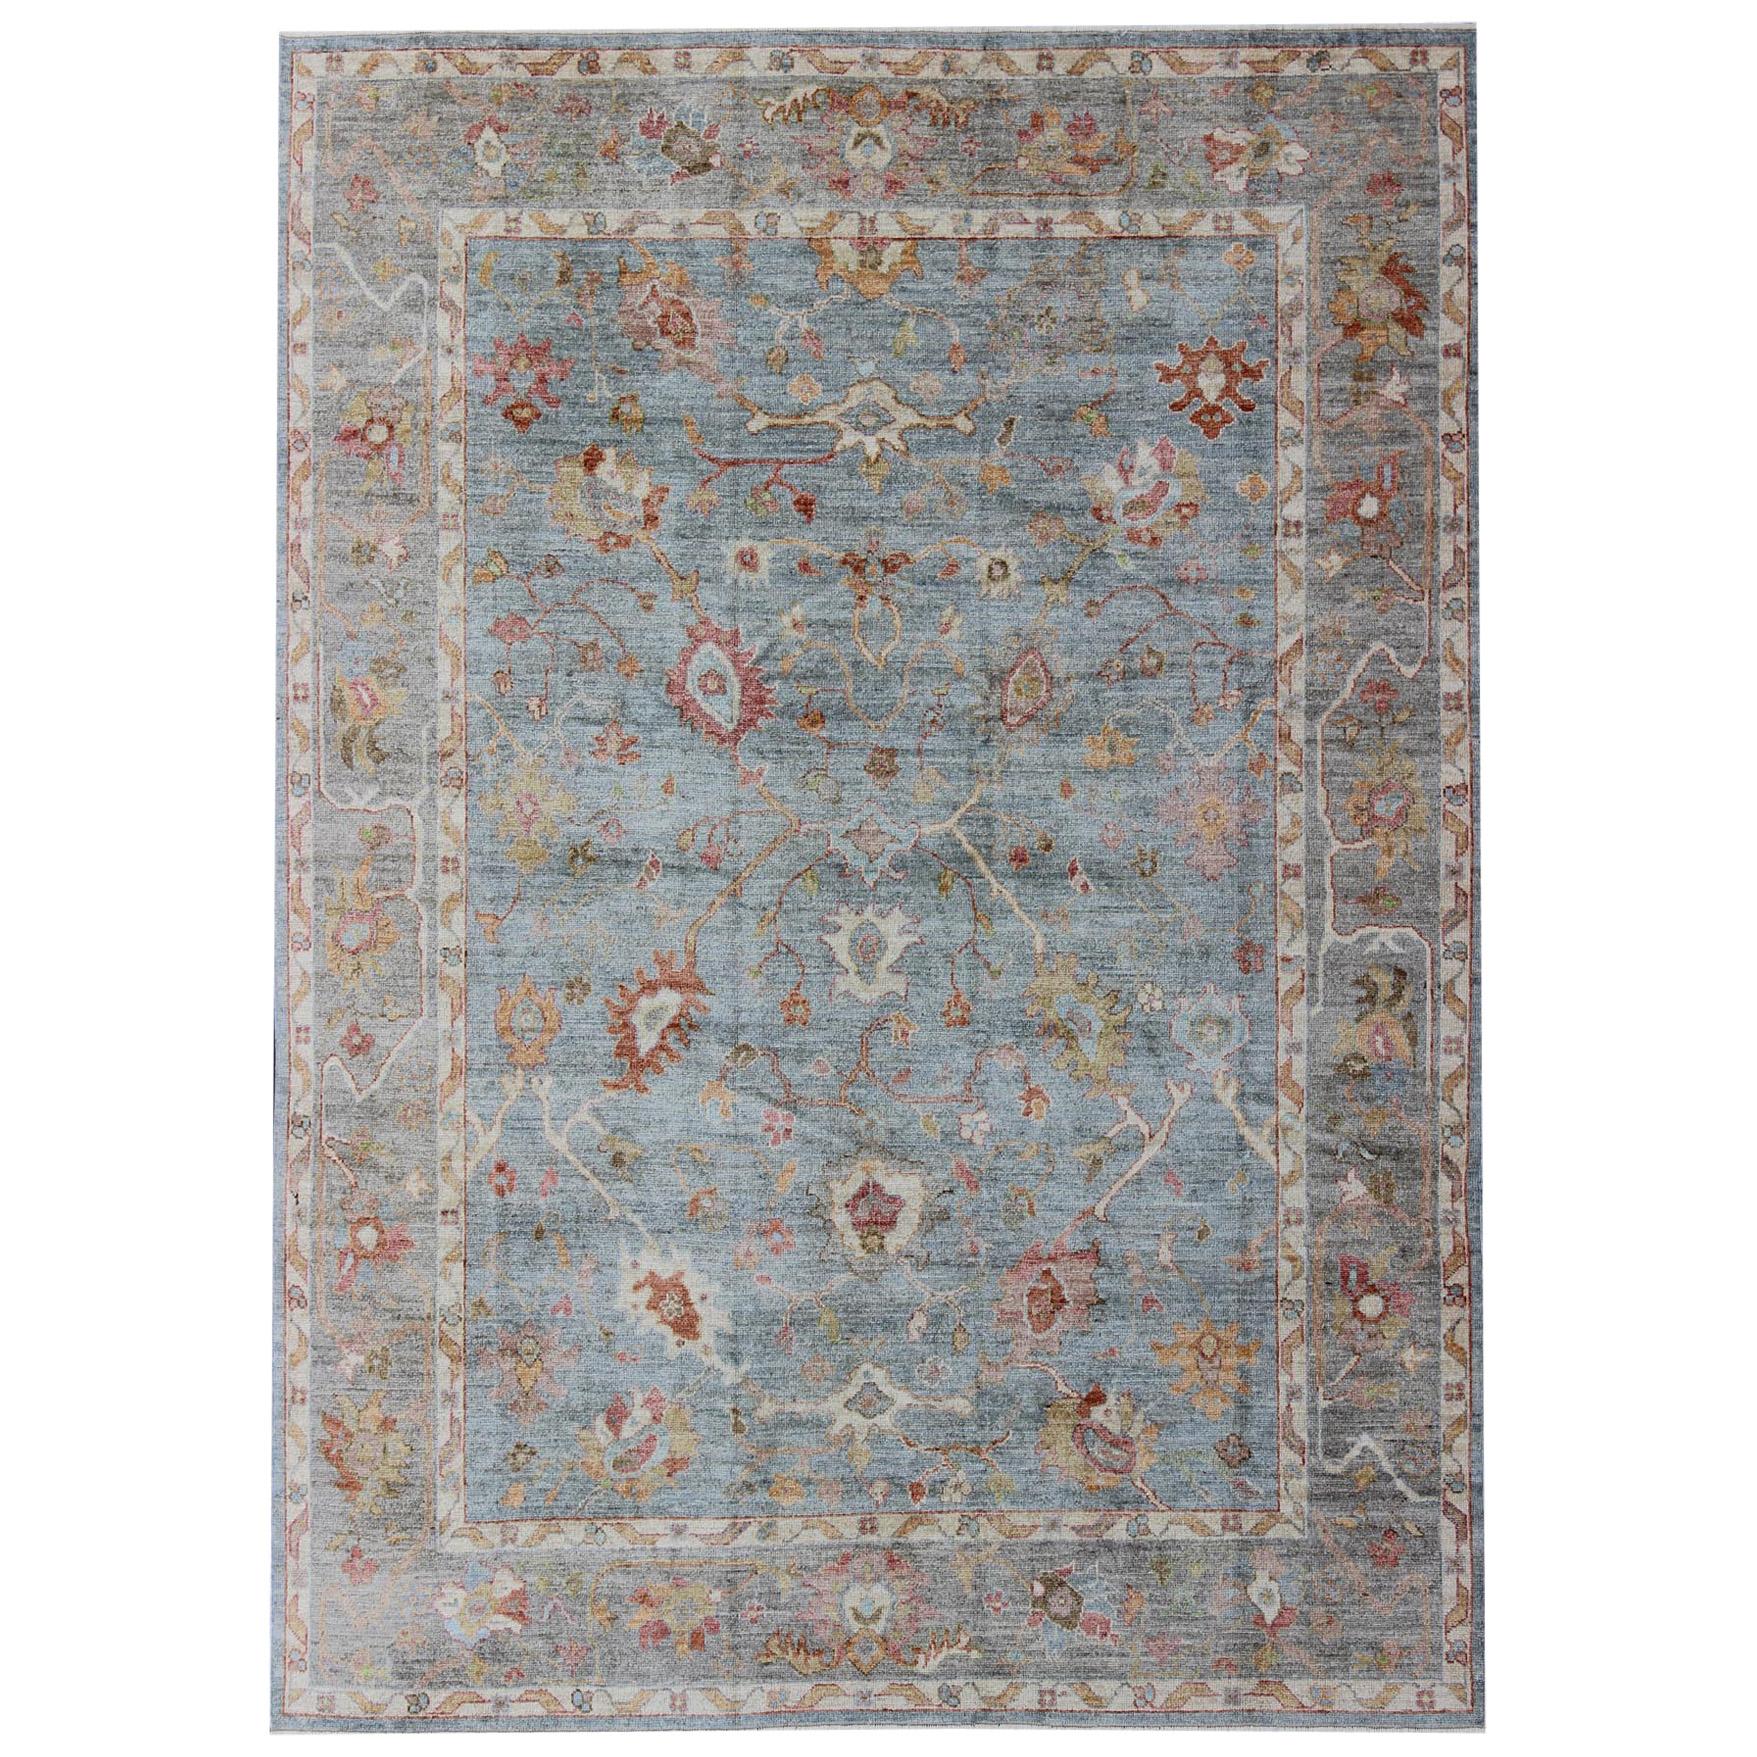 Angora Turkish Oushak Rug in Light Blue, Silver and Multi Colors For Sale